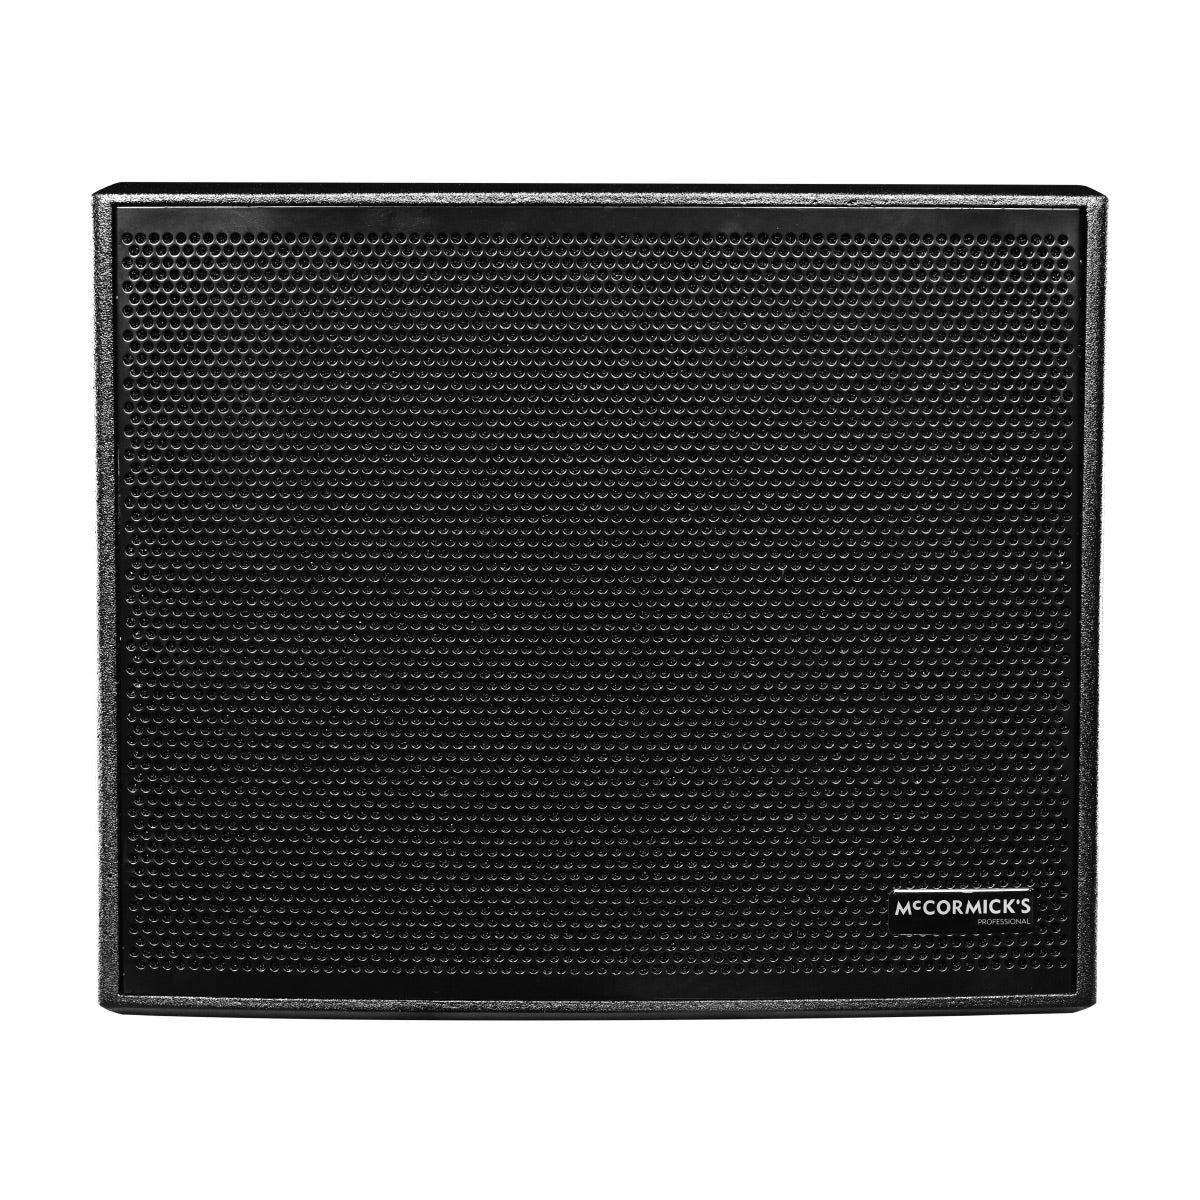 McCormick's Professional 18" Active Subwoofer